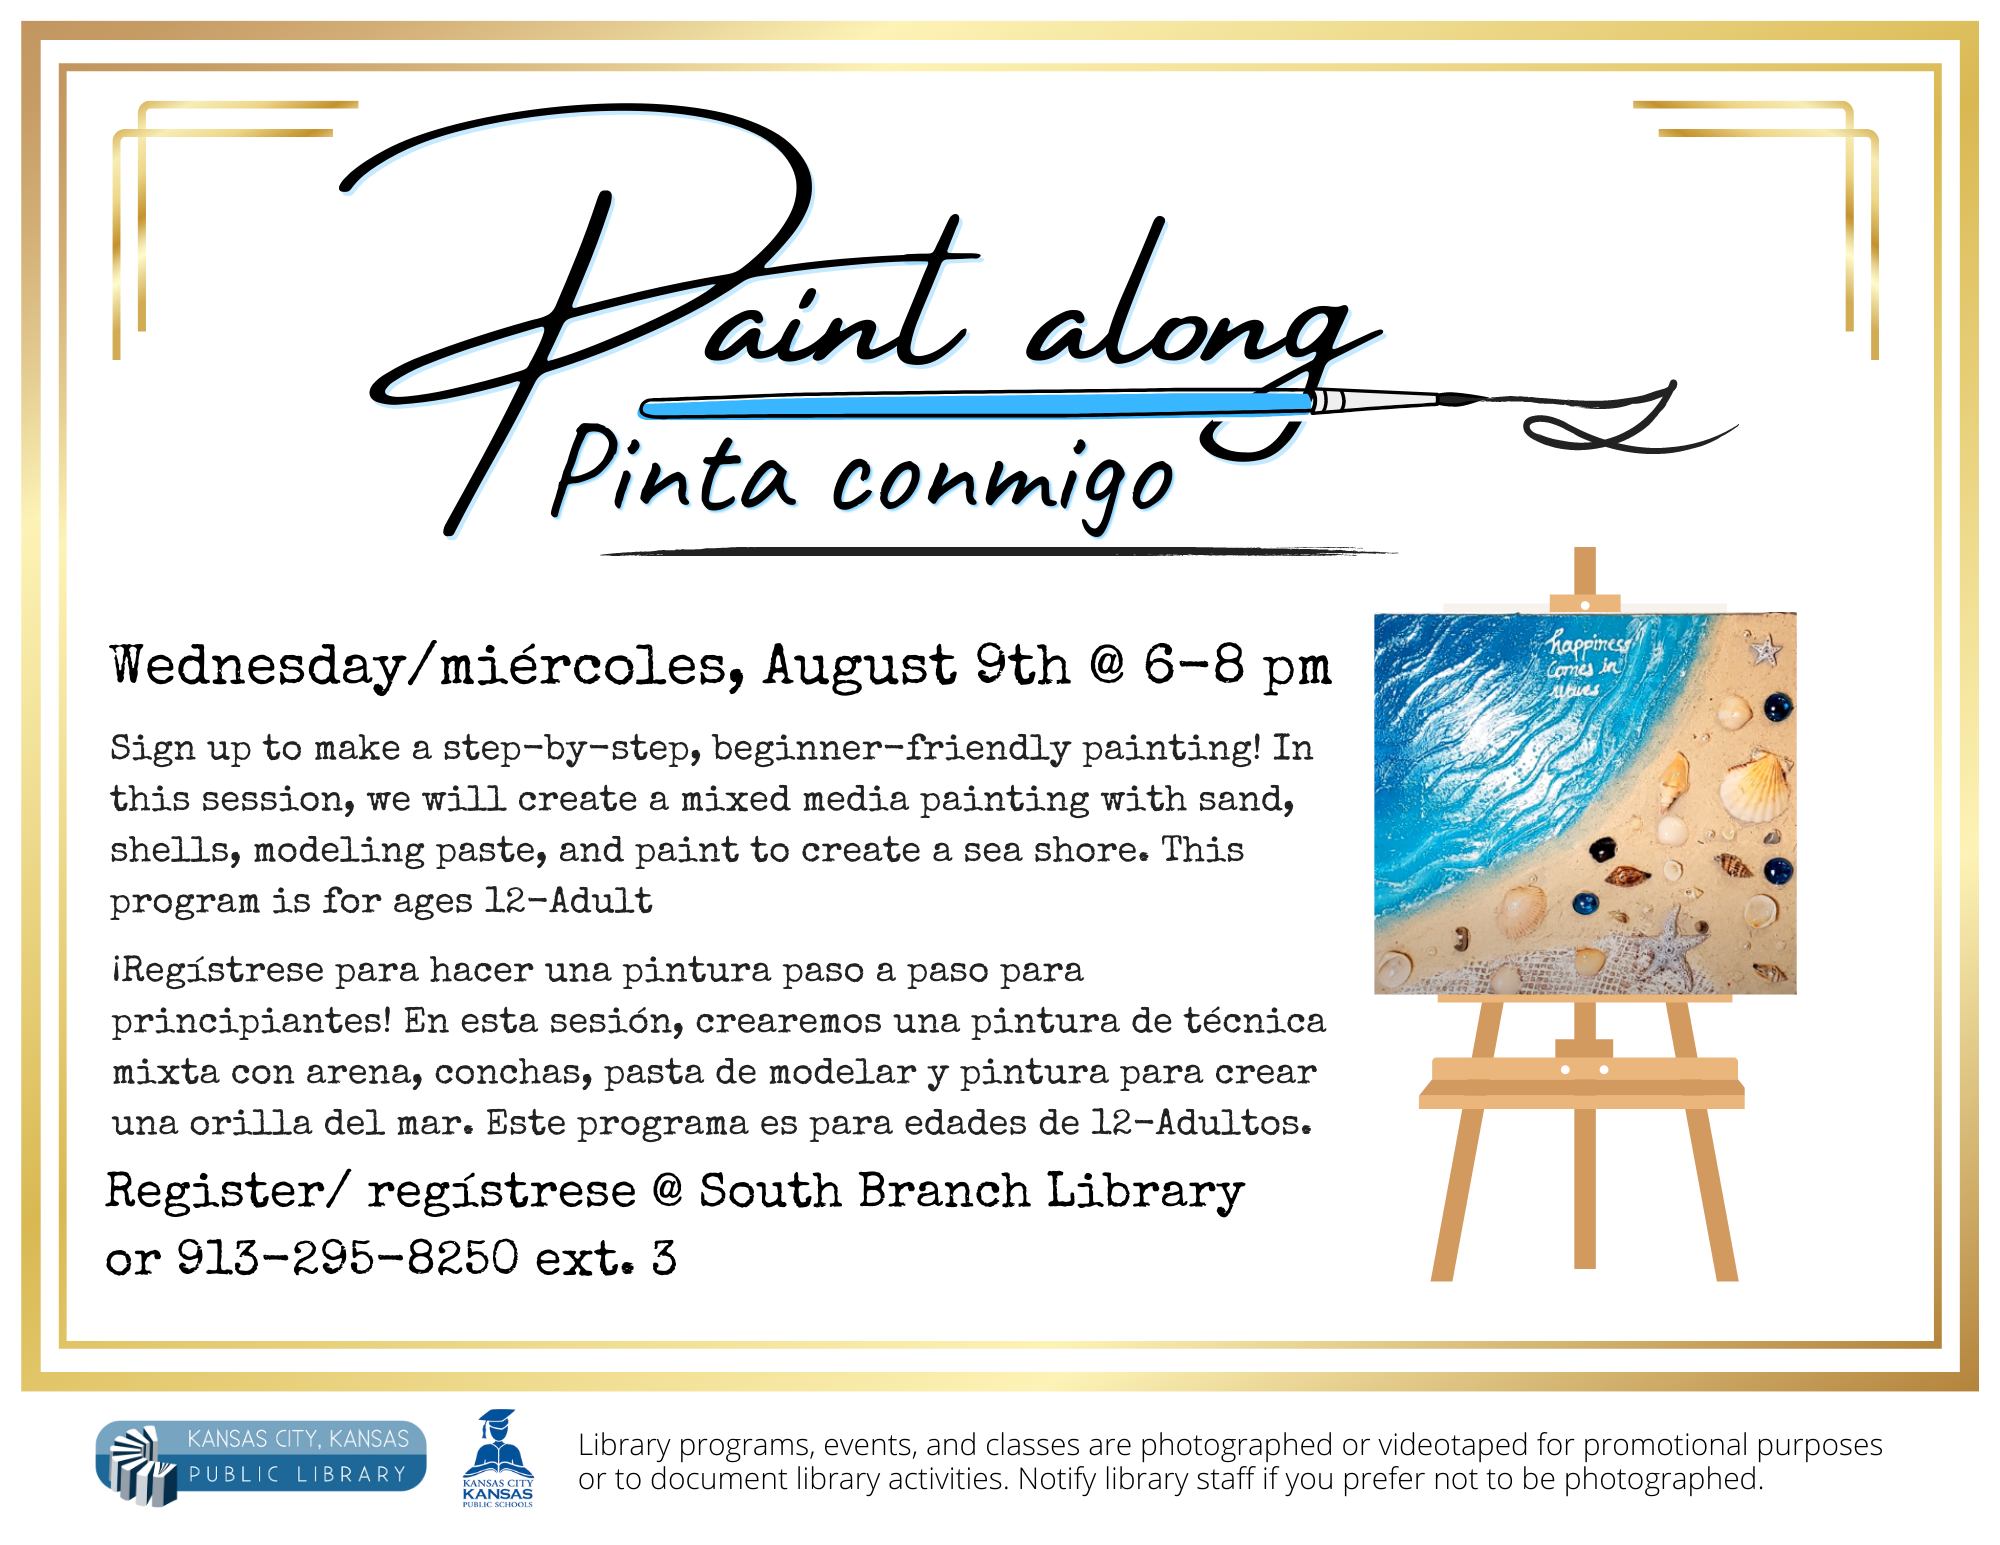 Paint Along flyer for August 9th at 6-8pm. Registration required.